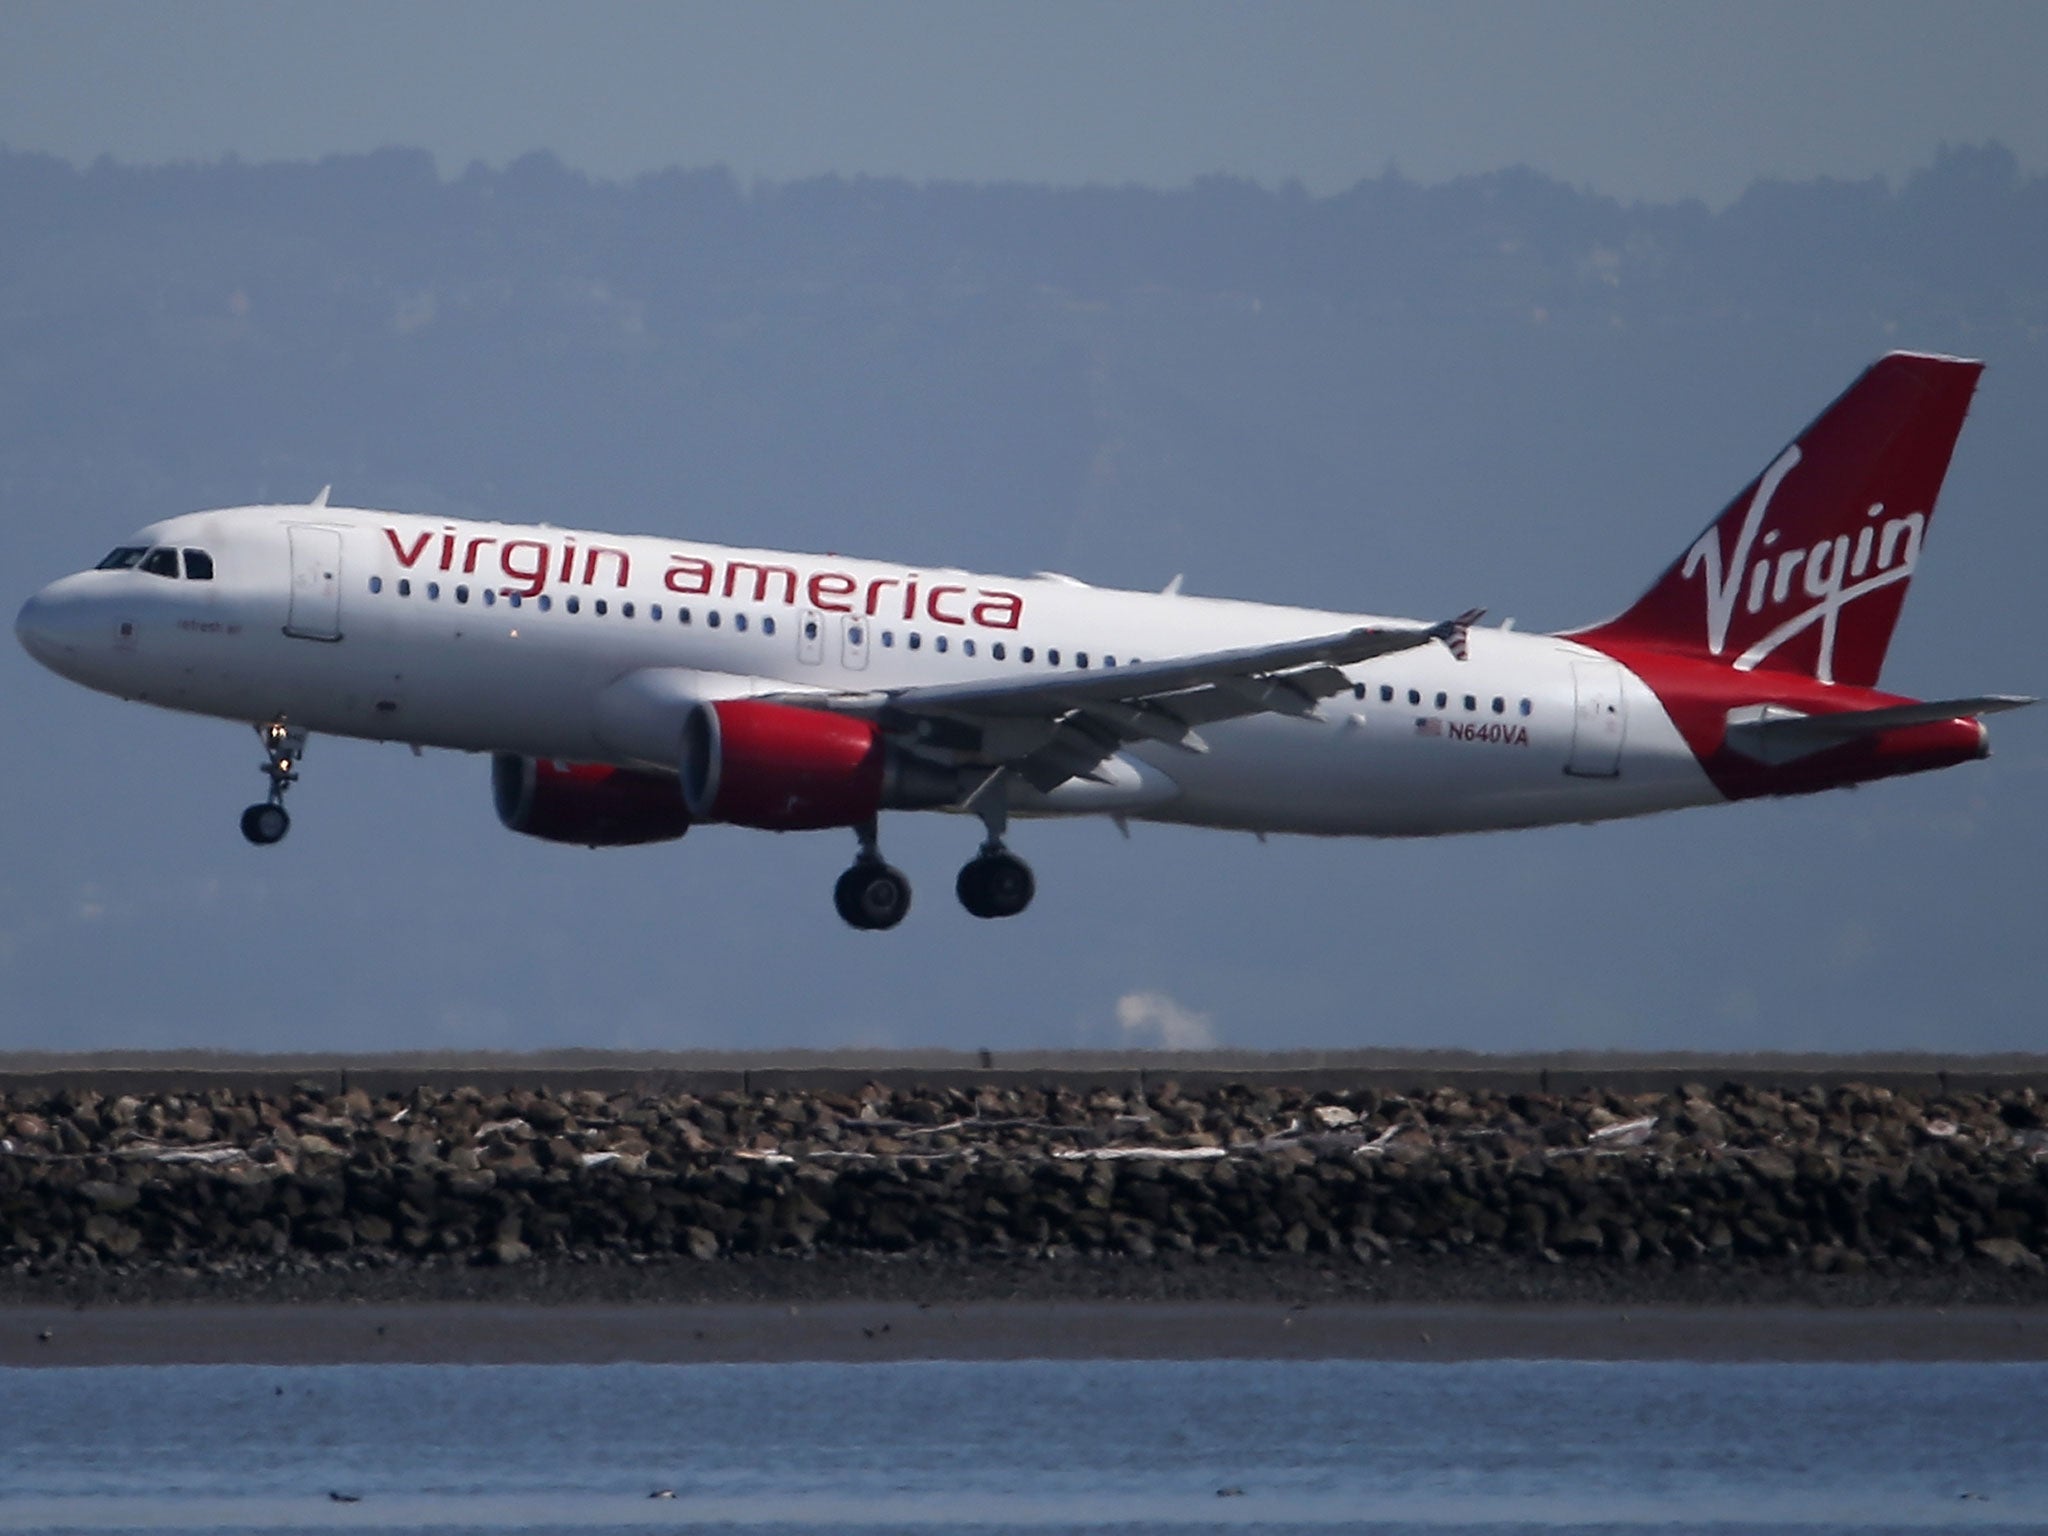 The merger airline will become the fifth largest in the United States